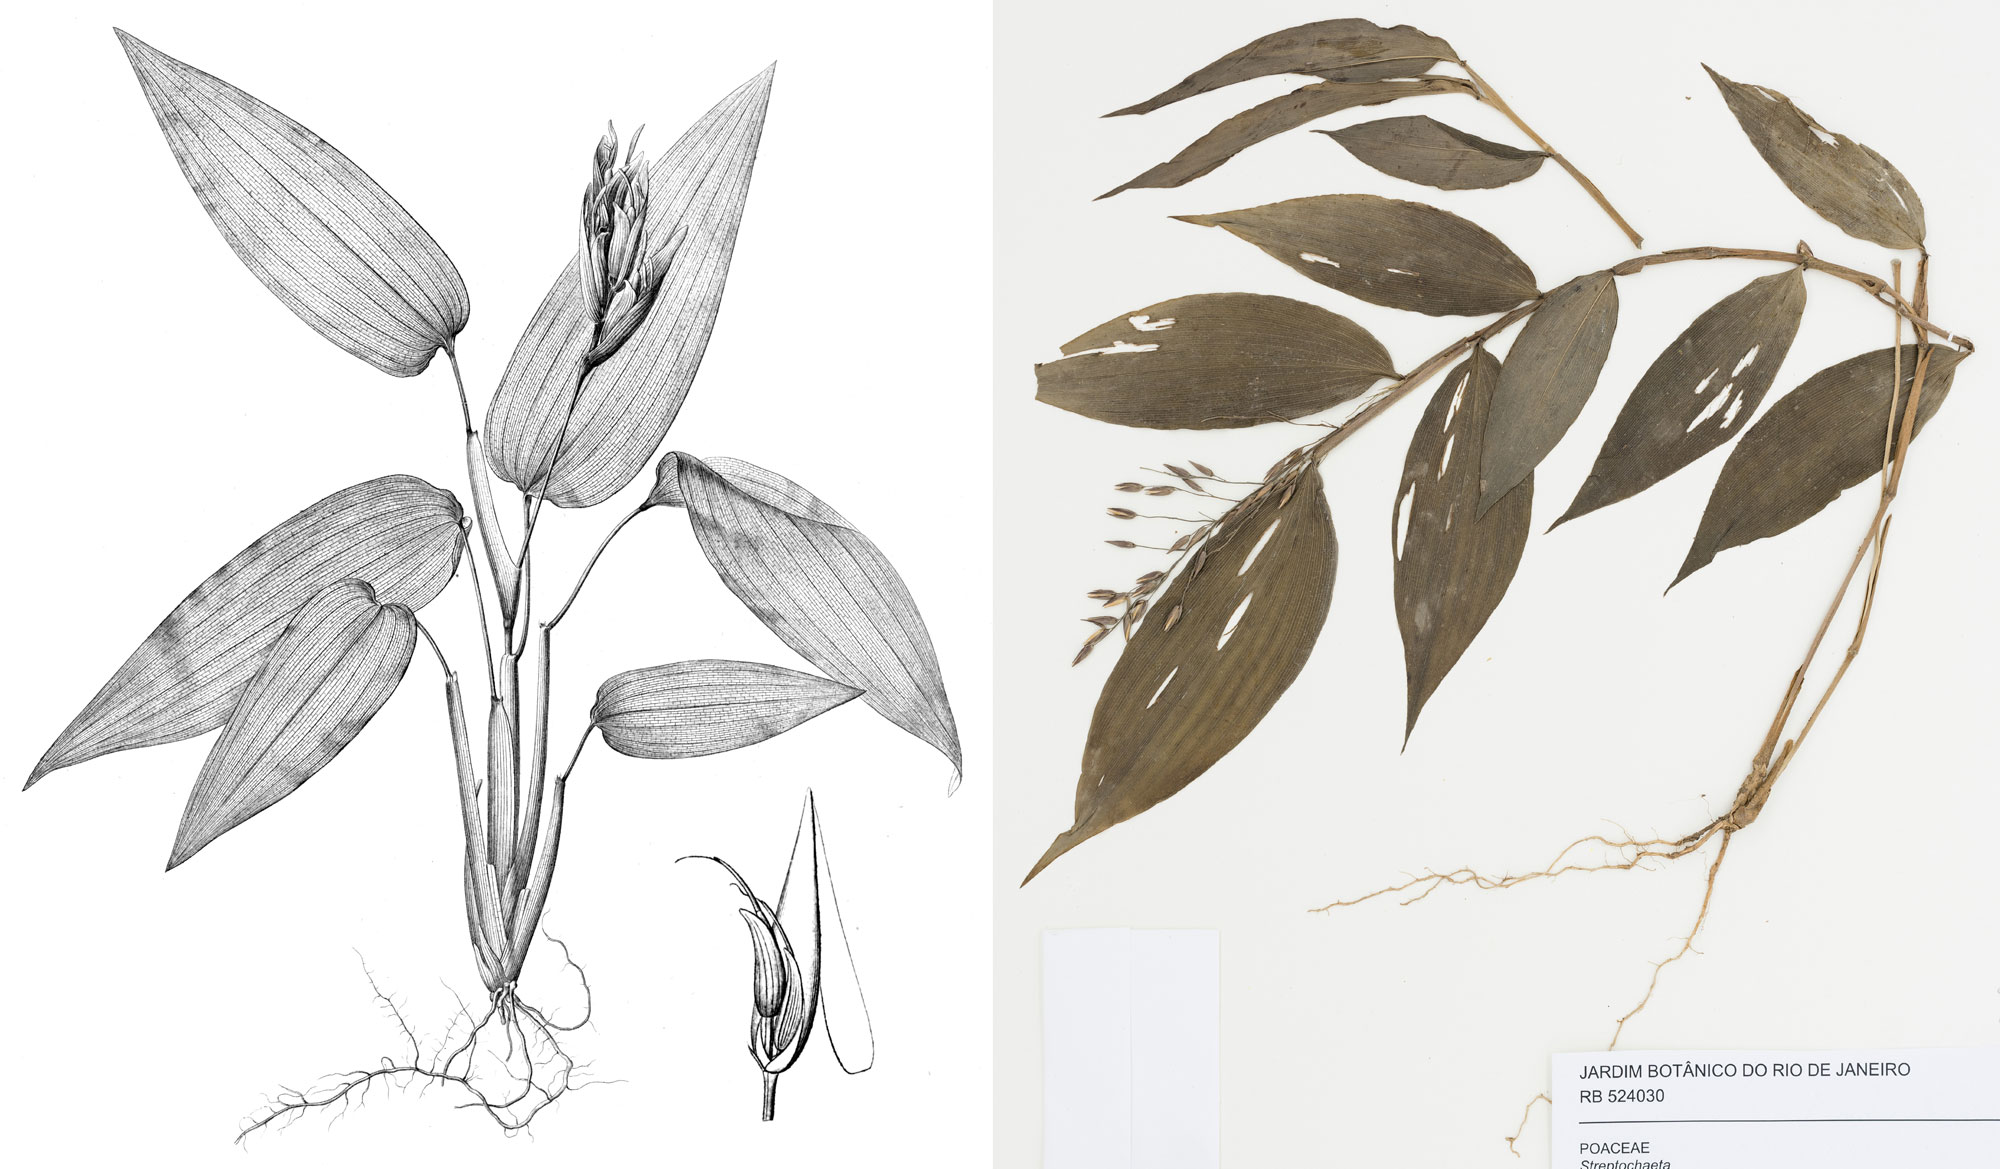 2-panel figure showing grasses in Anomochlooideae. Panel 1: Line drawing of a plant. The drawing shows a small plant with ovate leaves and an inflorescence. Panel 2: Photograph of a herbarium specimen showing a stem, alternately arranged elliptical leaves, and a terminal inflorescence.